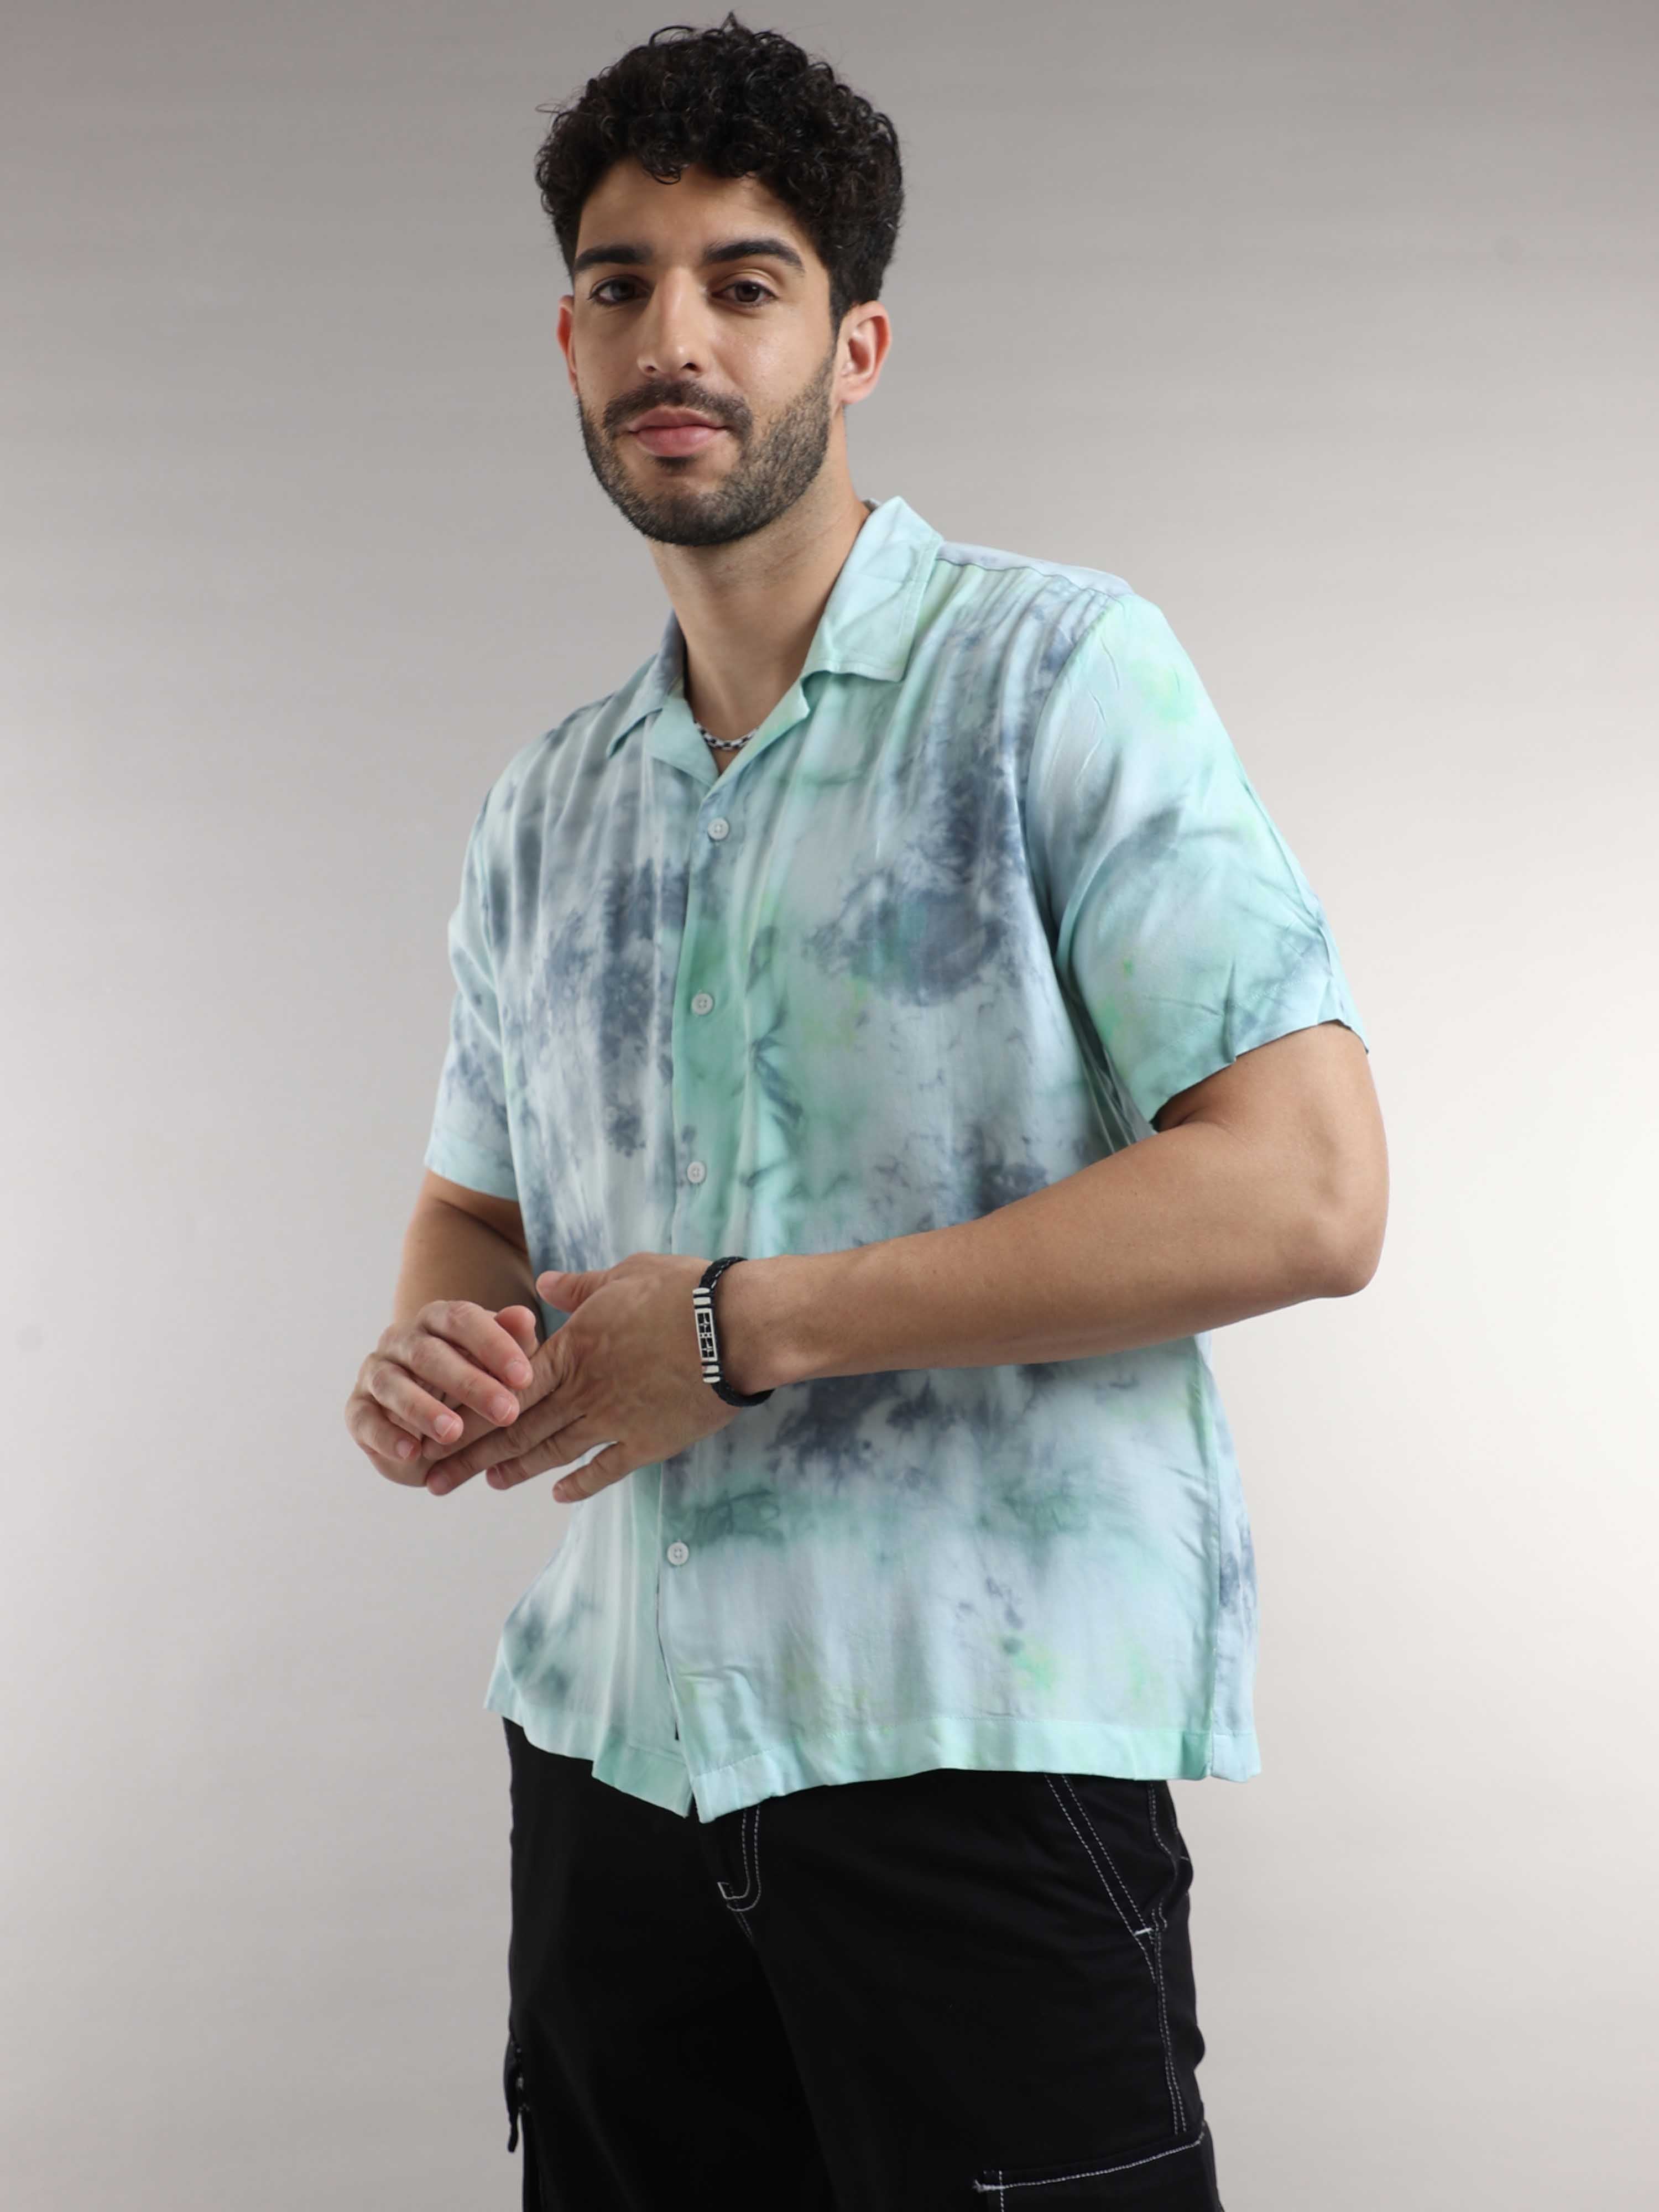 Buy Latest Casual Half Sleeve Printed Shirts for Men OnlineRs. 1049.00